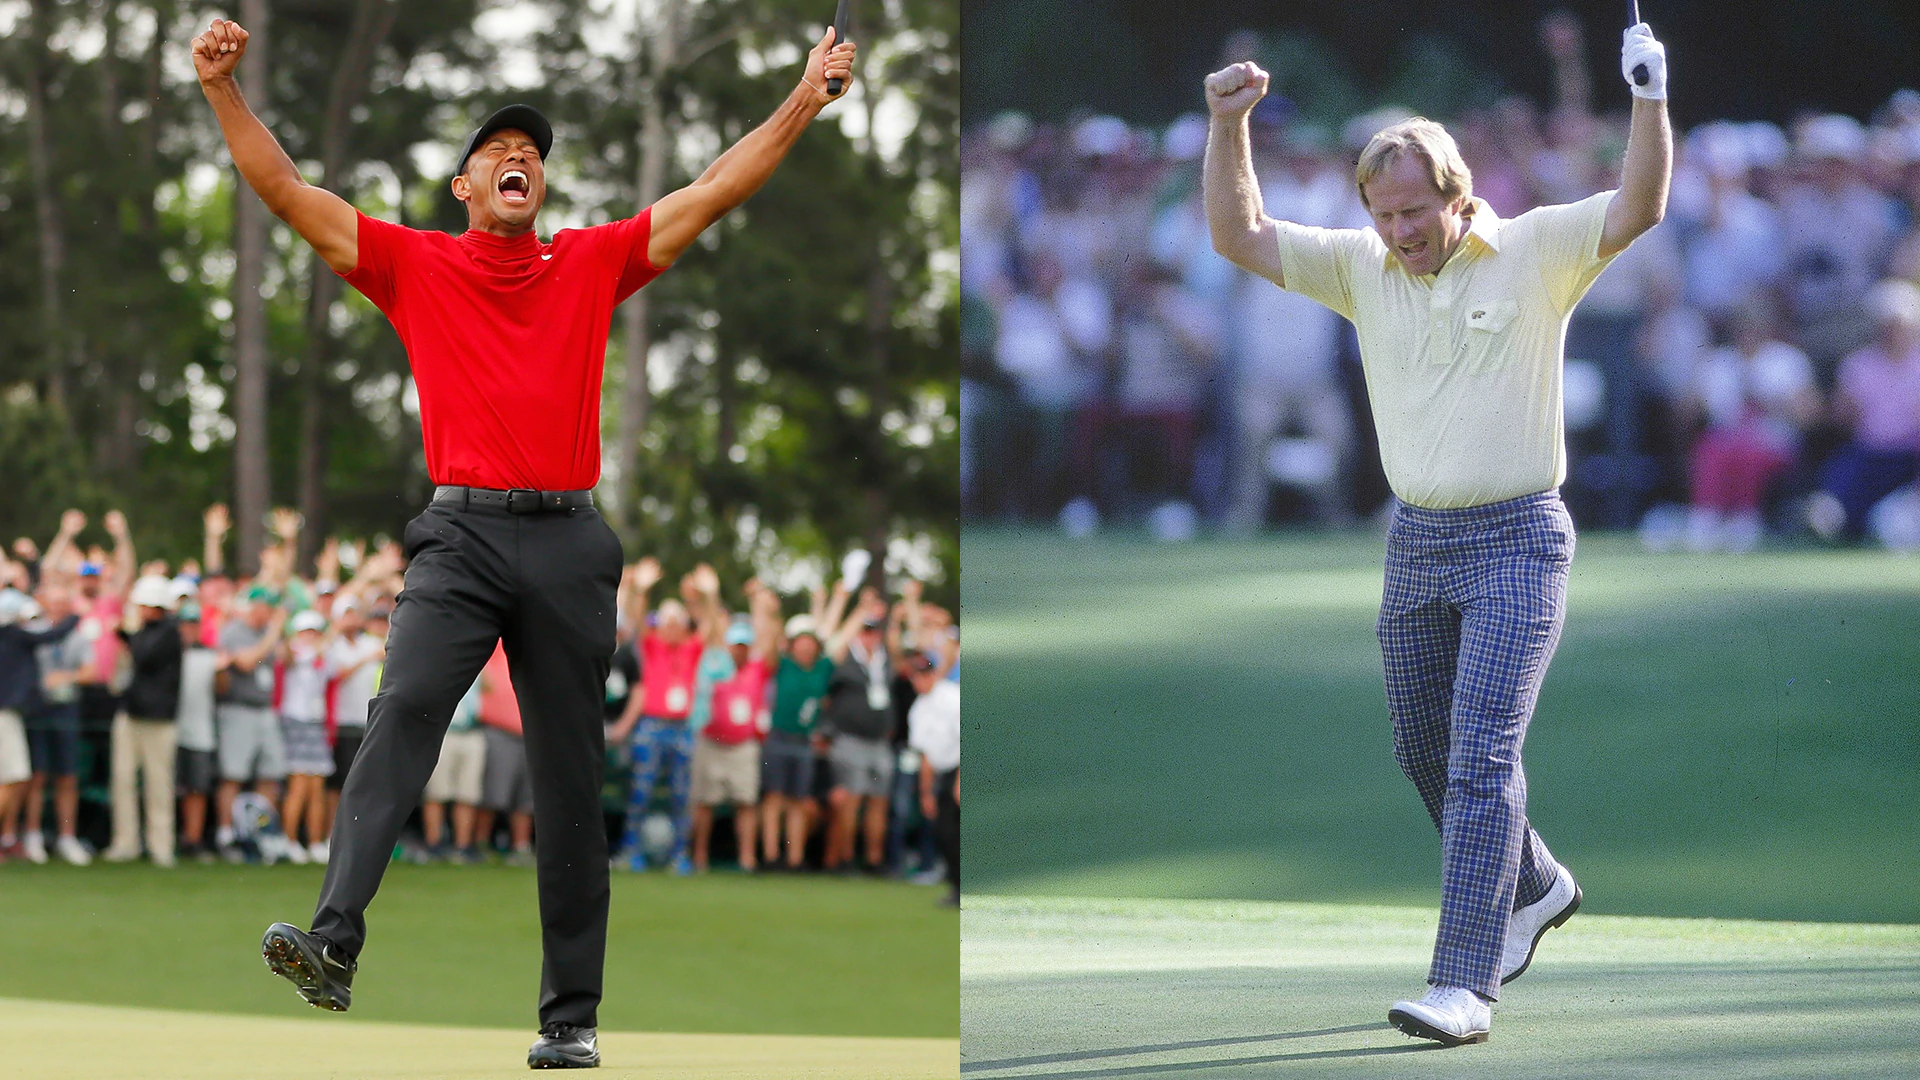 Tiger: Jack's win in '86 is my first Masters memory